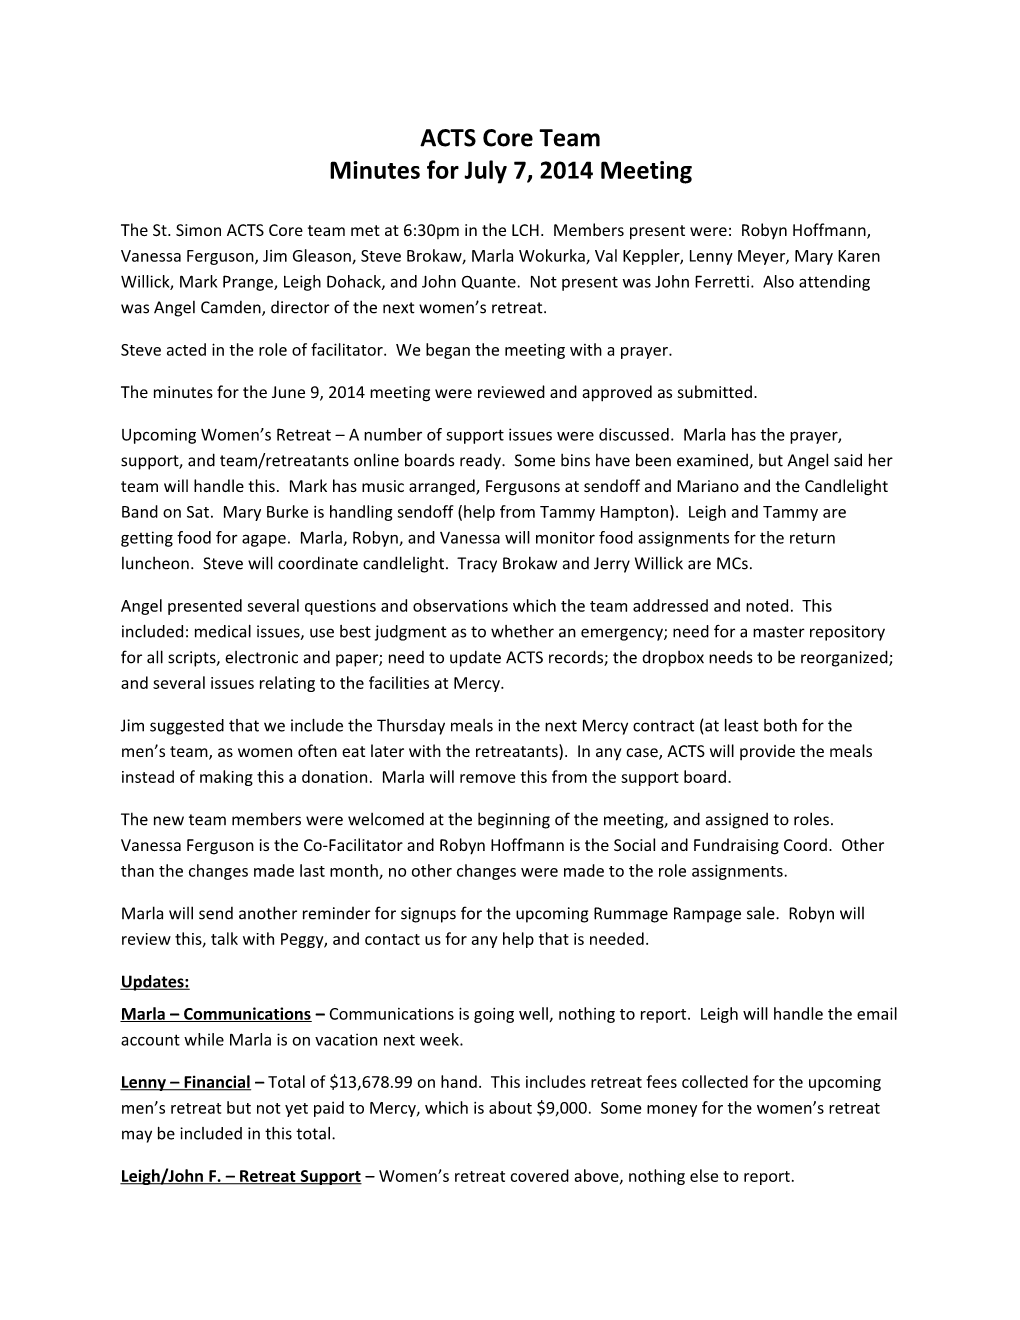 Minutes for July 7, 2014 Meeting